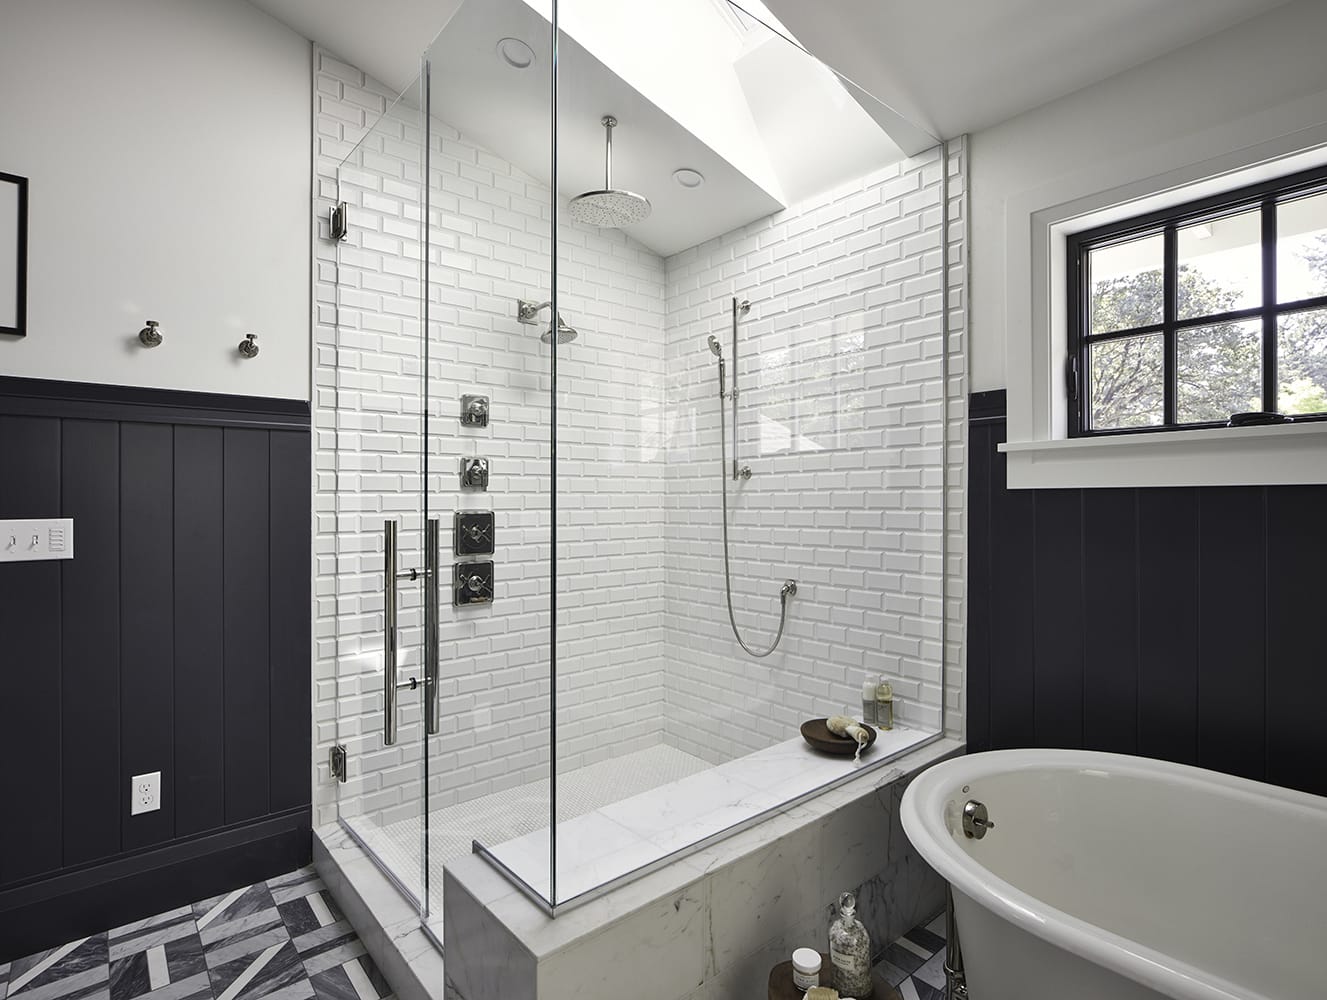 Wide angle of a glass shower with white tile and a skylight on the ceiling above